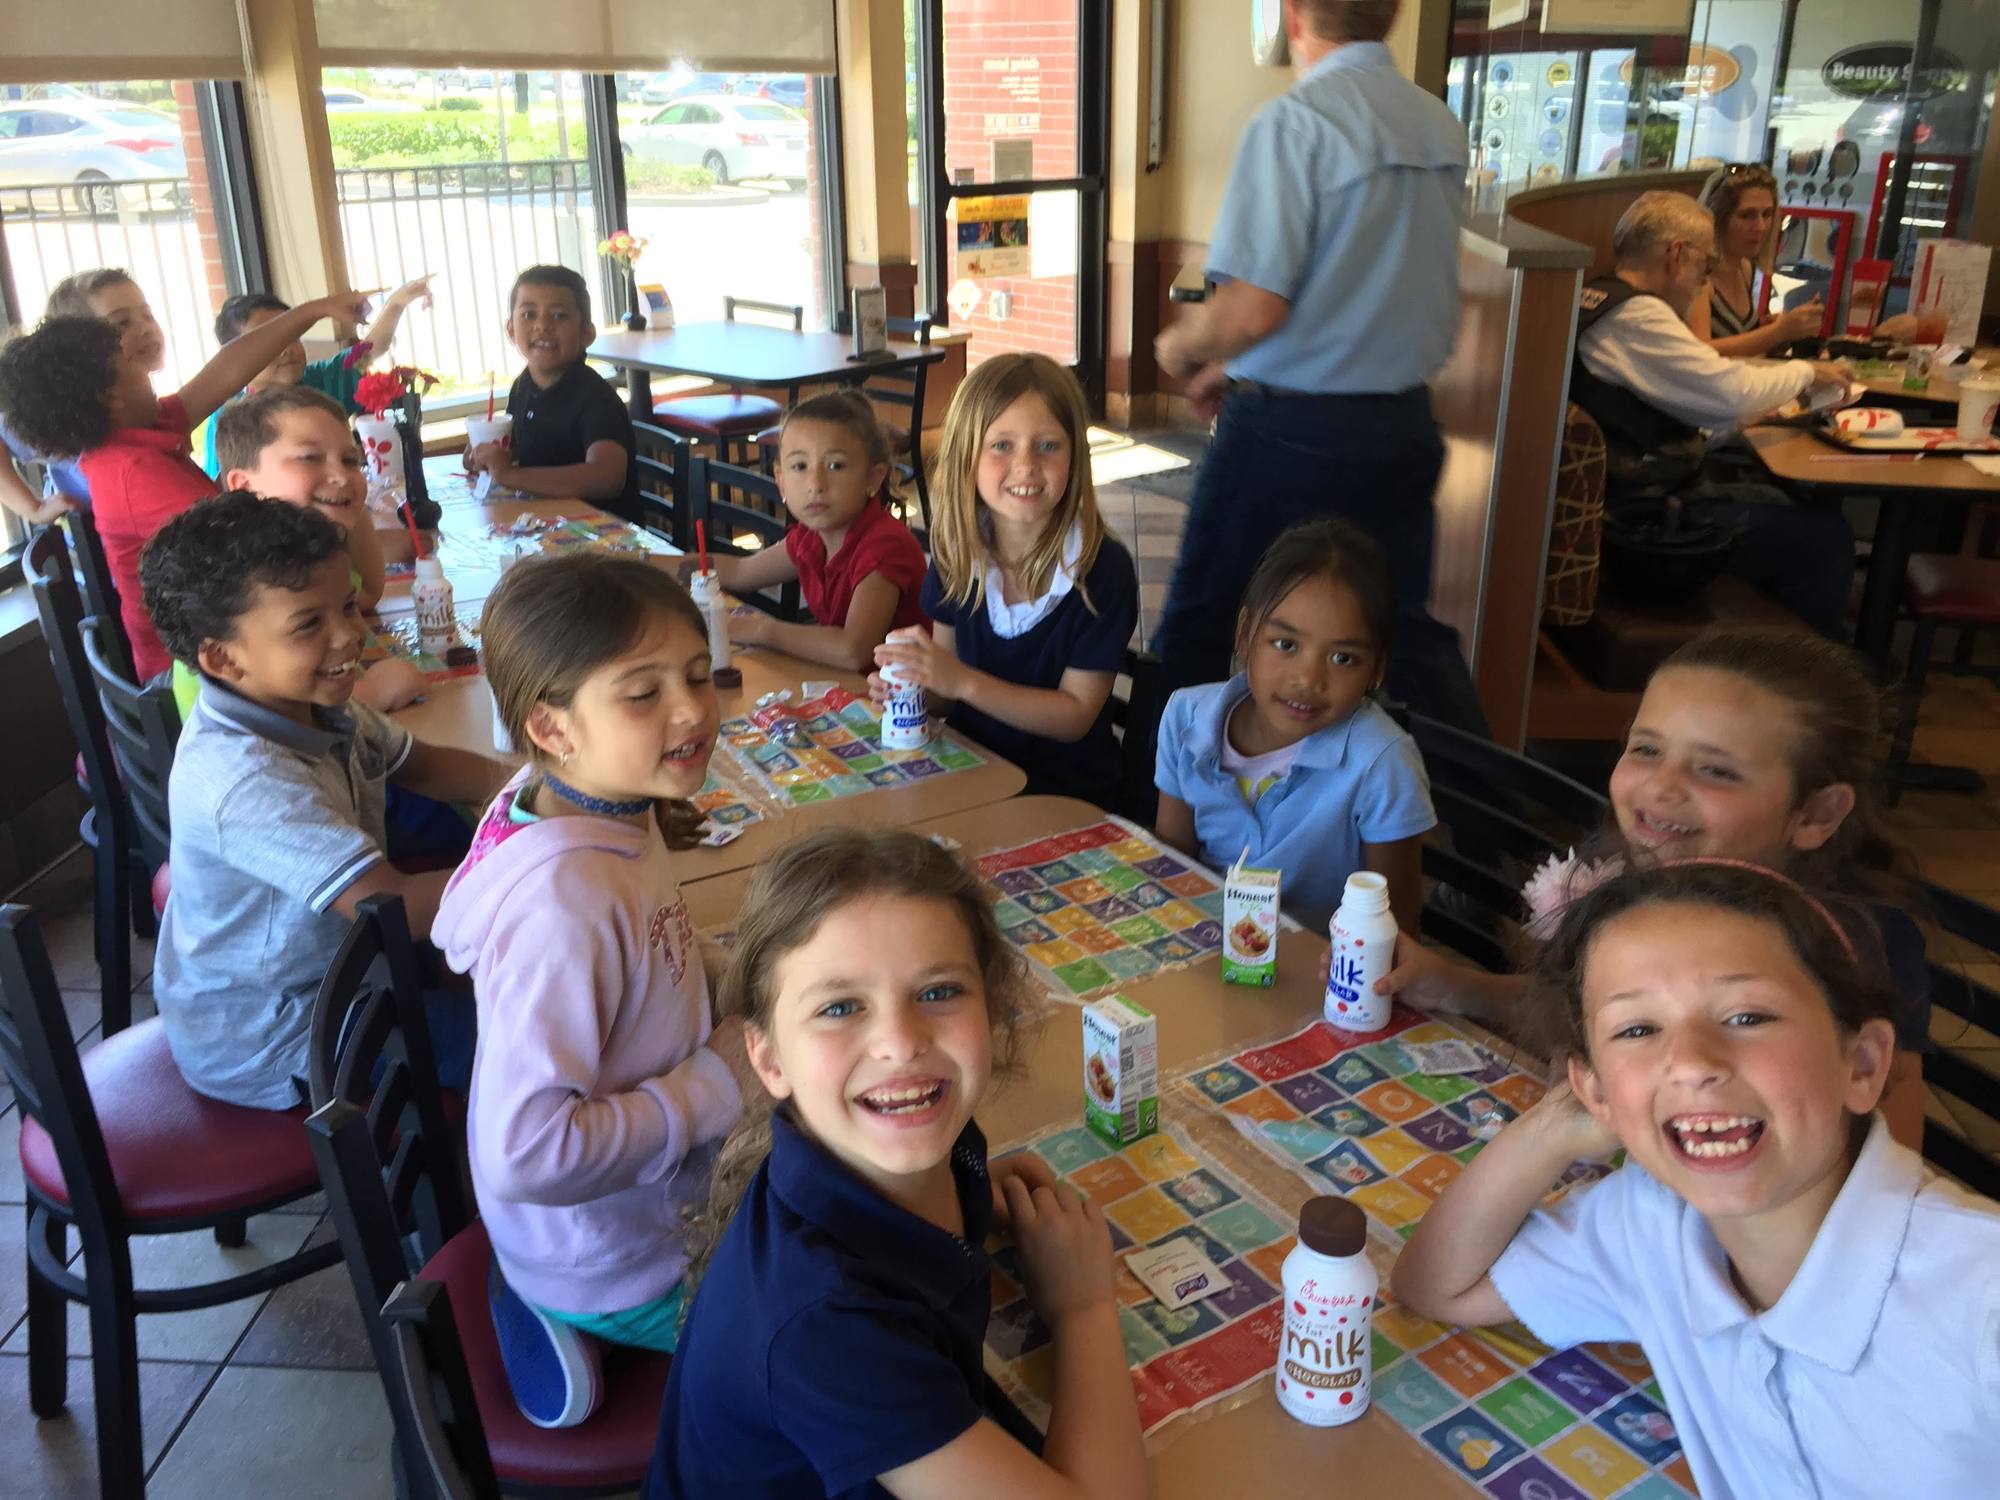 Twenty-four Wadsworth Elementary School students were taken on a limo and lunch date to Chick-fil-A as a reward for their success with SSYRA. Photo courtesy of Teresa Rizzo